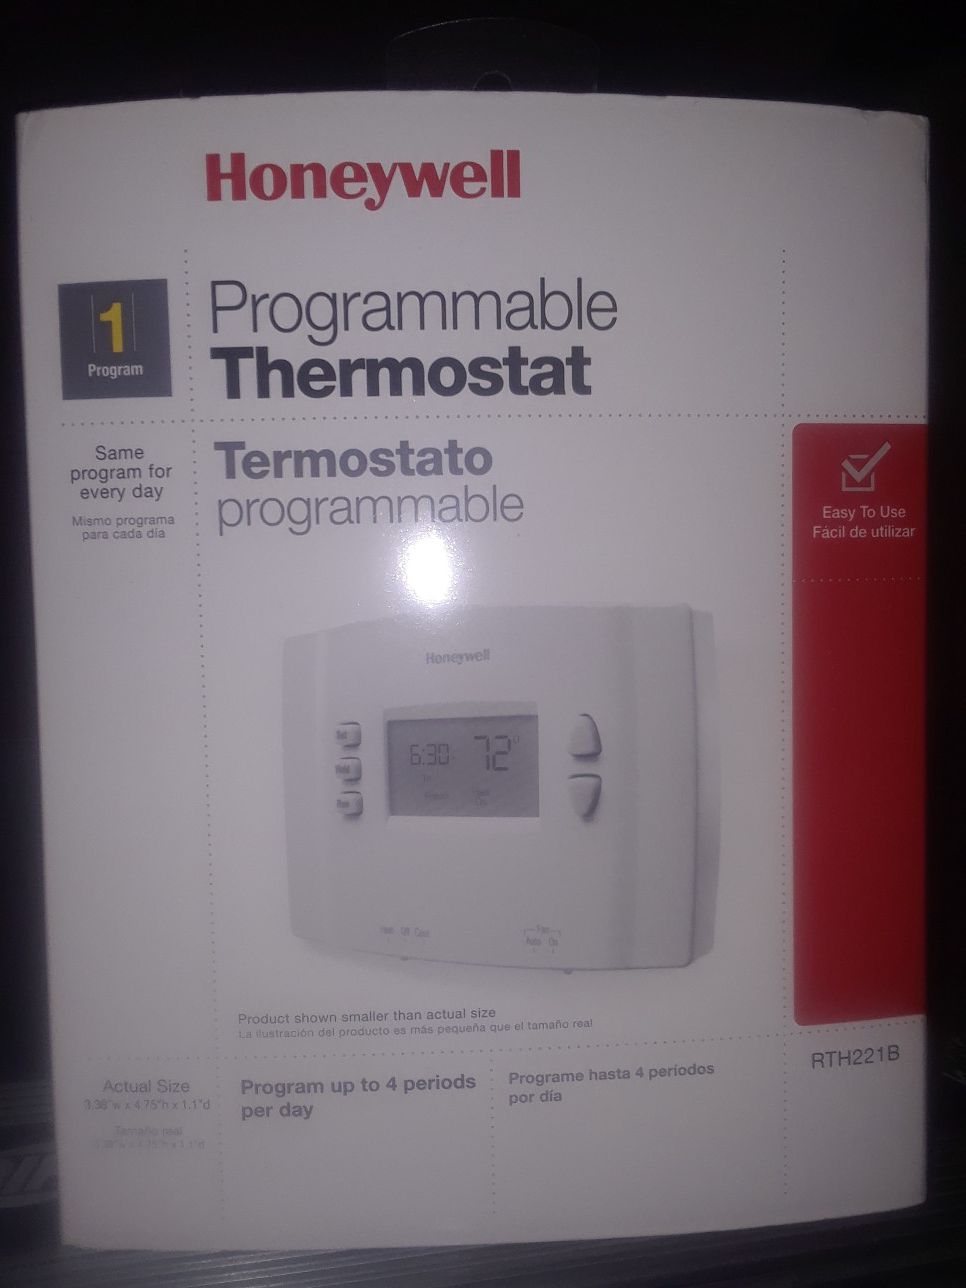 Programmable thermostat in box